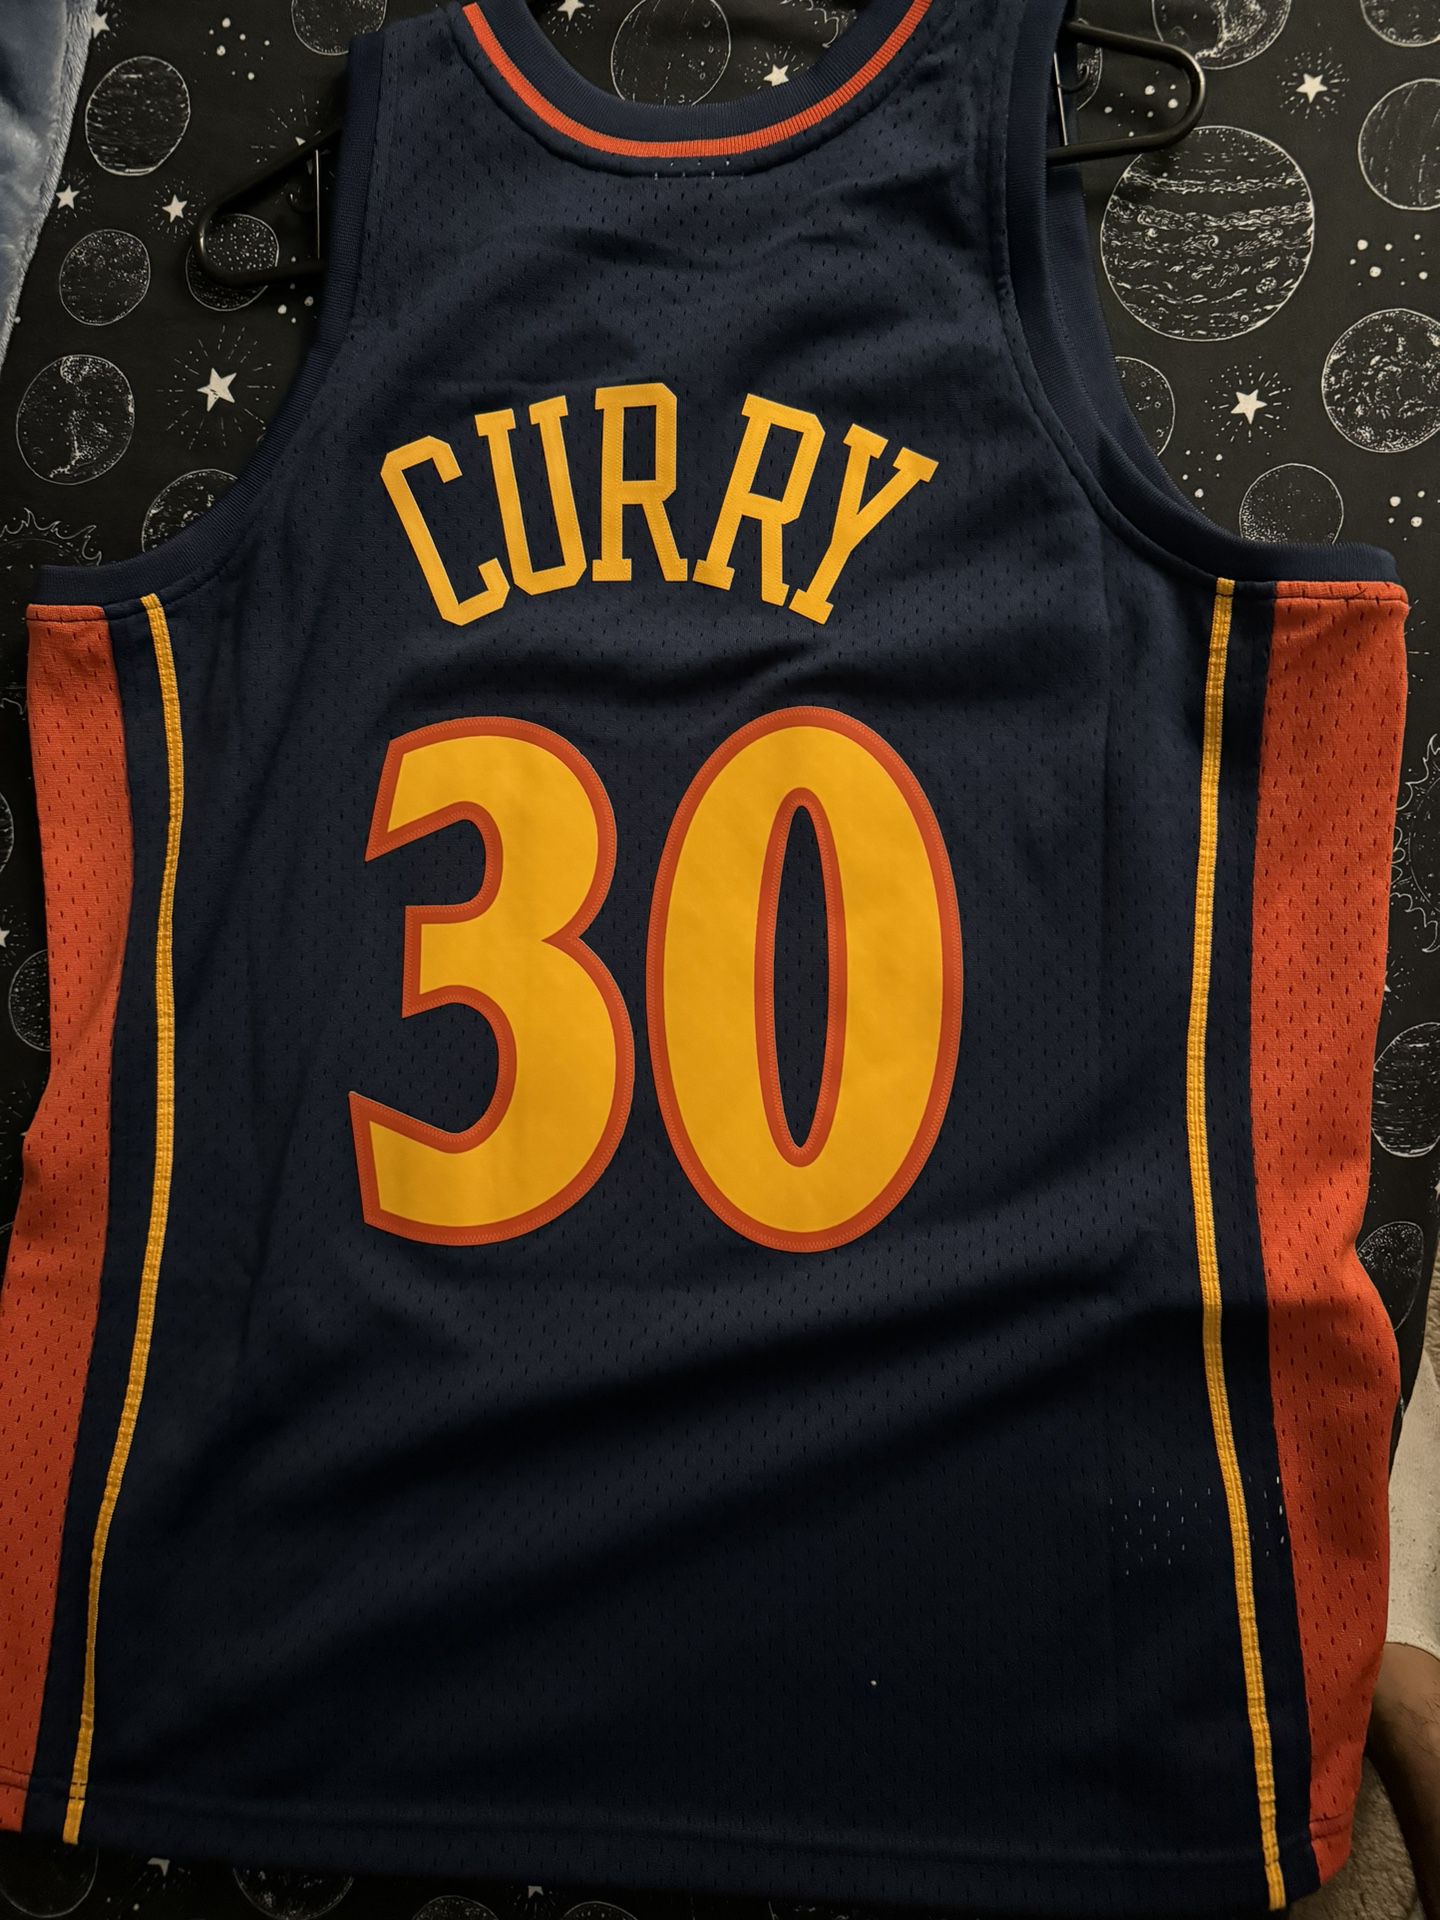 Authentic 09-10 Stephen Curry Jersey